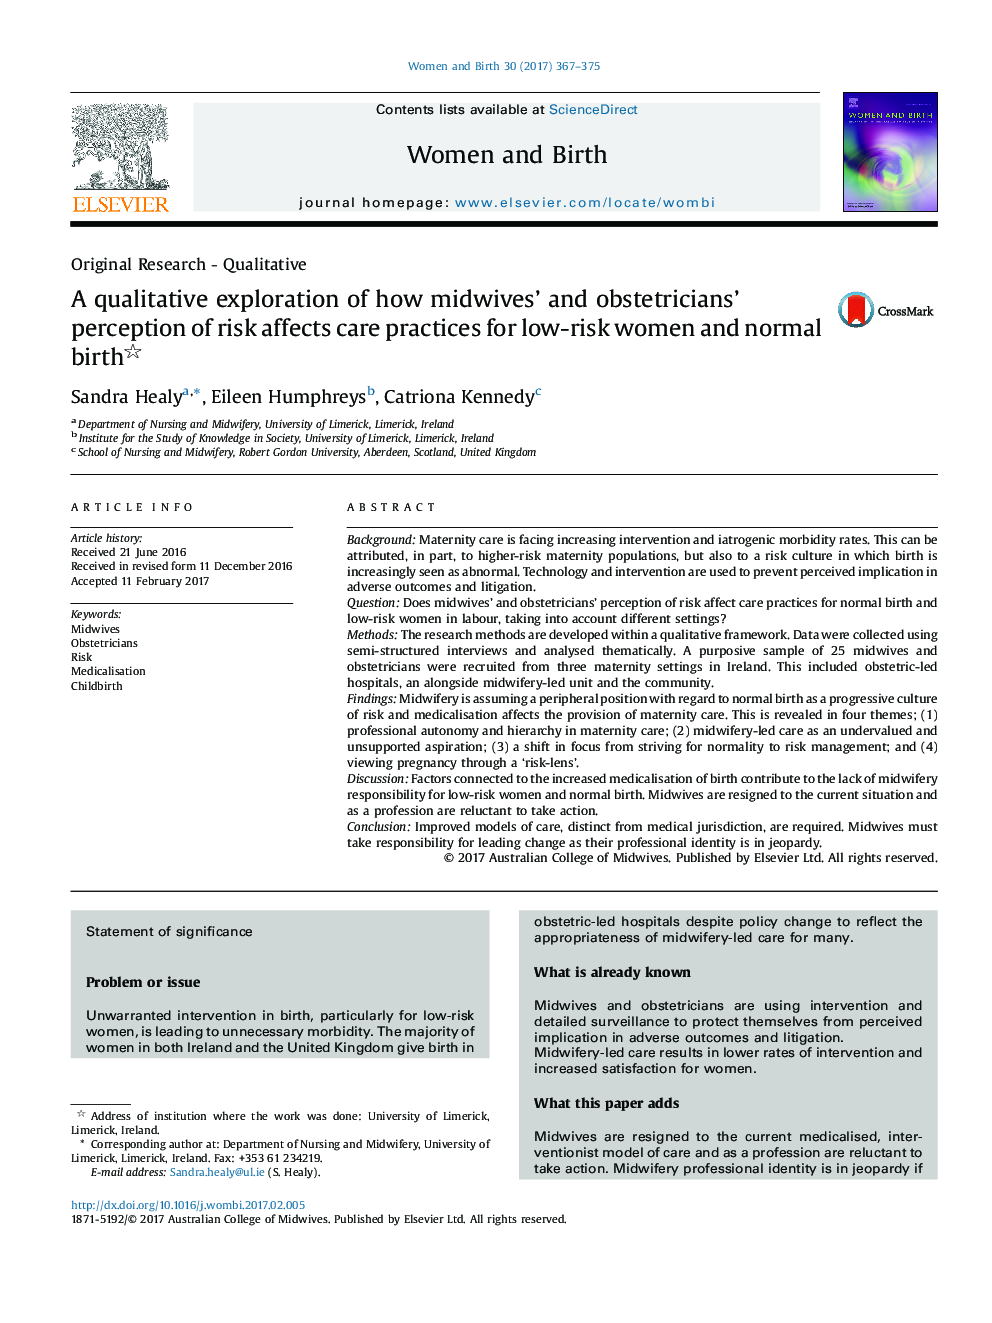 A qualitative exploration of how midwives' and obstetricians' perception of risk affects care practices for low-risk women and normal birth